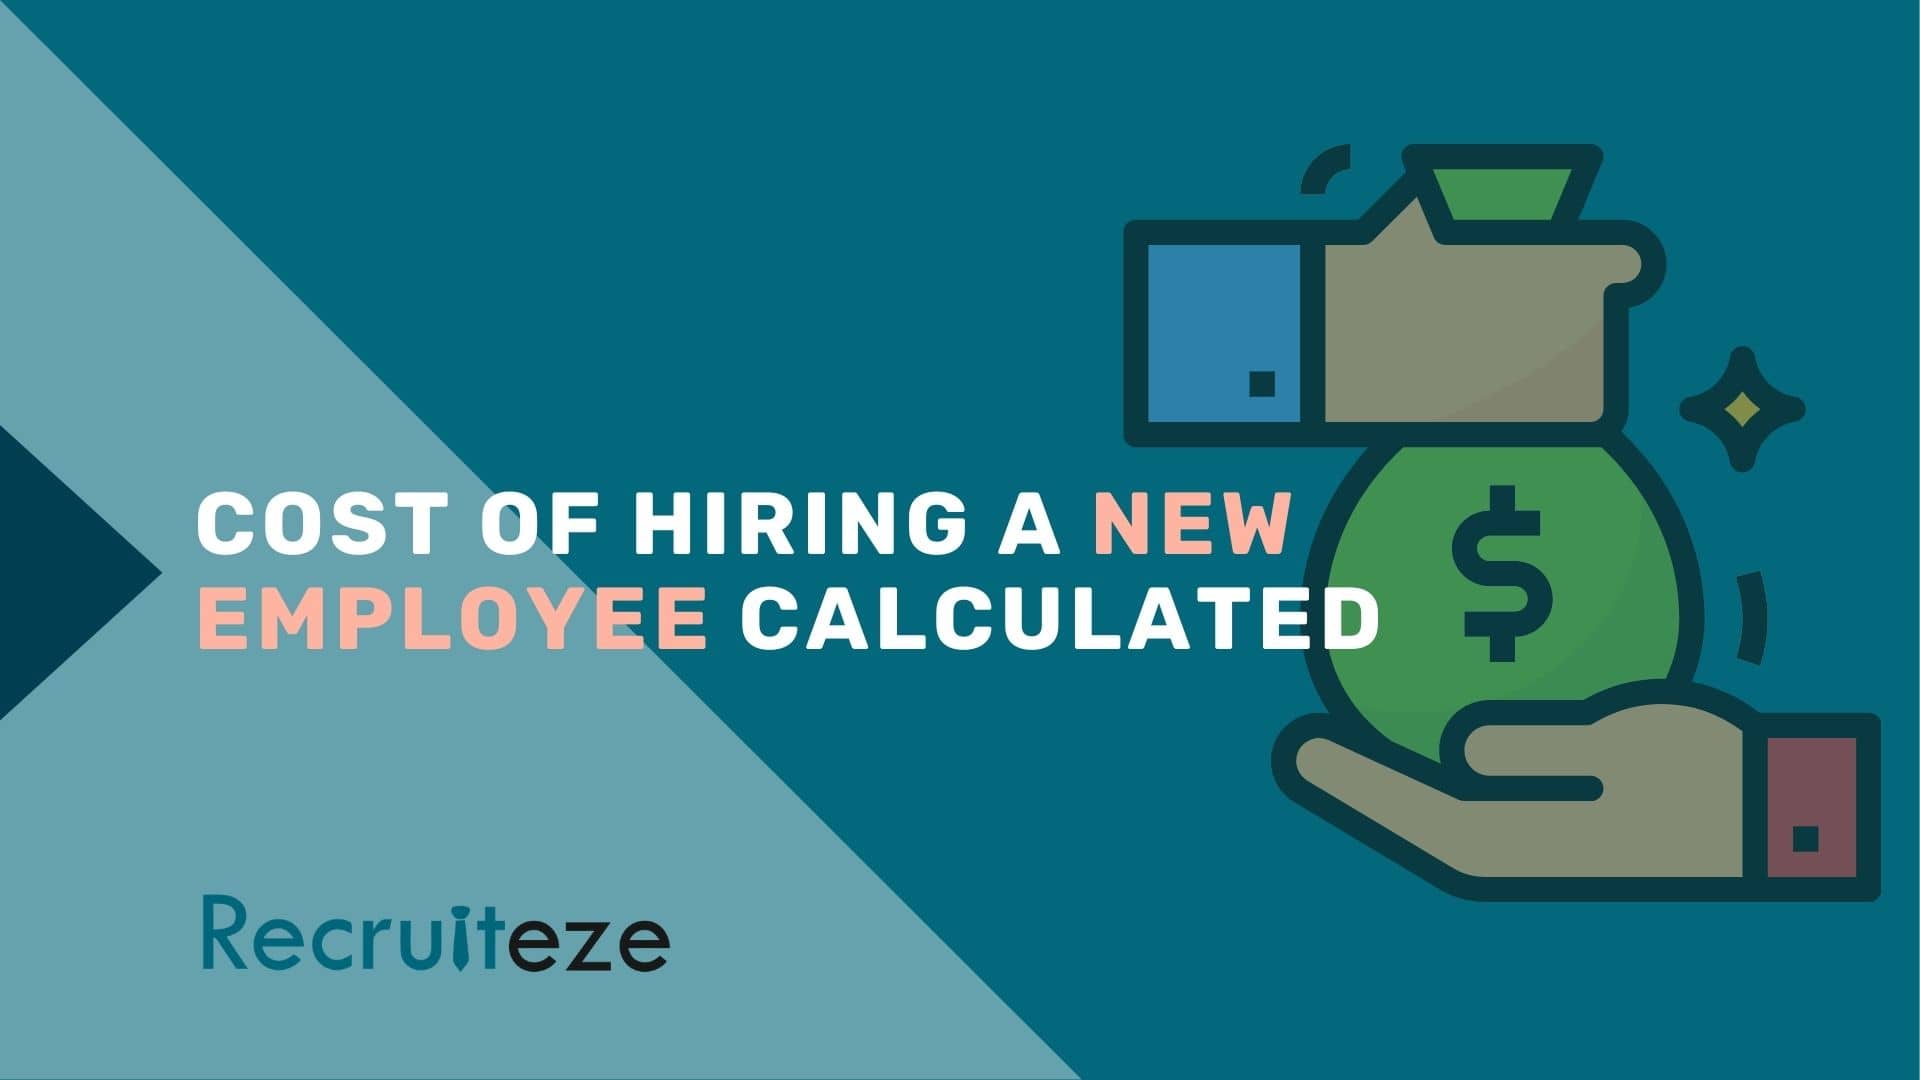 Cost of hiring a new employee calculated - Recruiteze